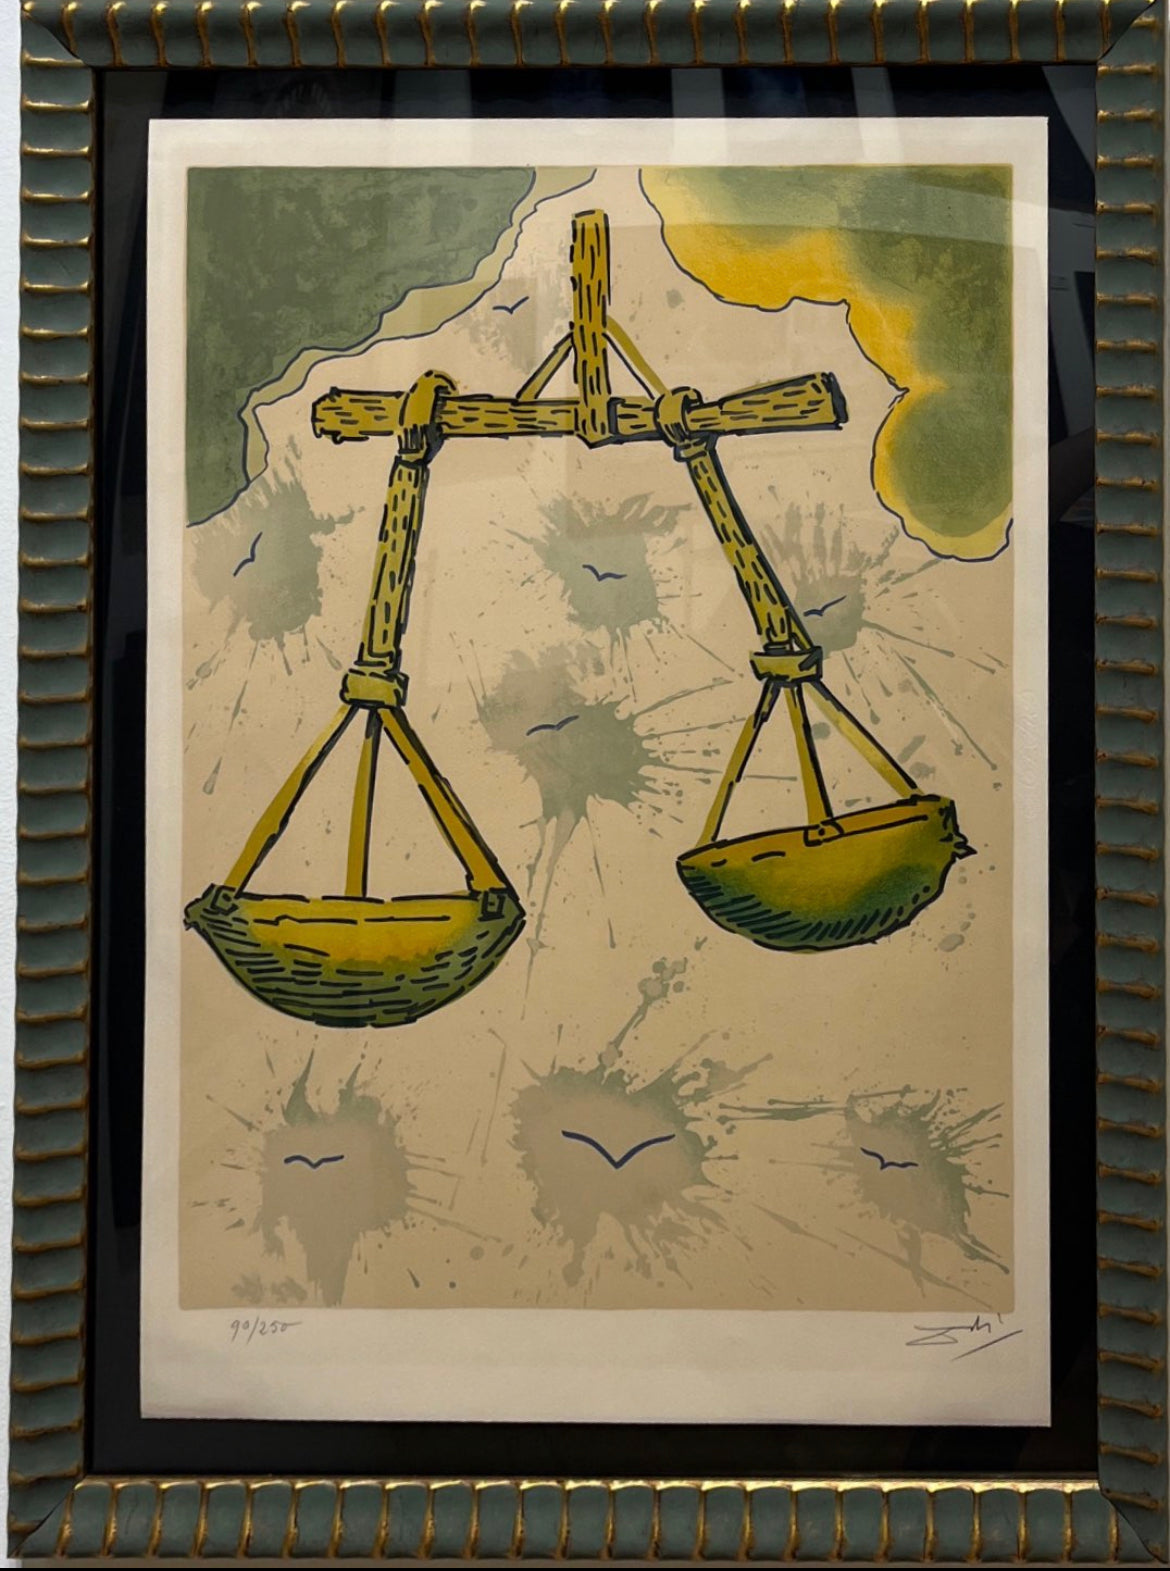  Libra, from Signs of the zodiac (1967) Custom Framed by Ao5 Gallery